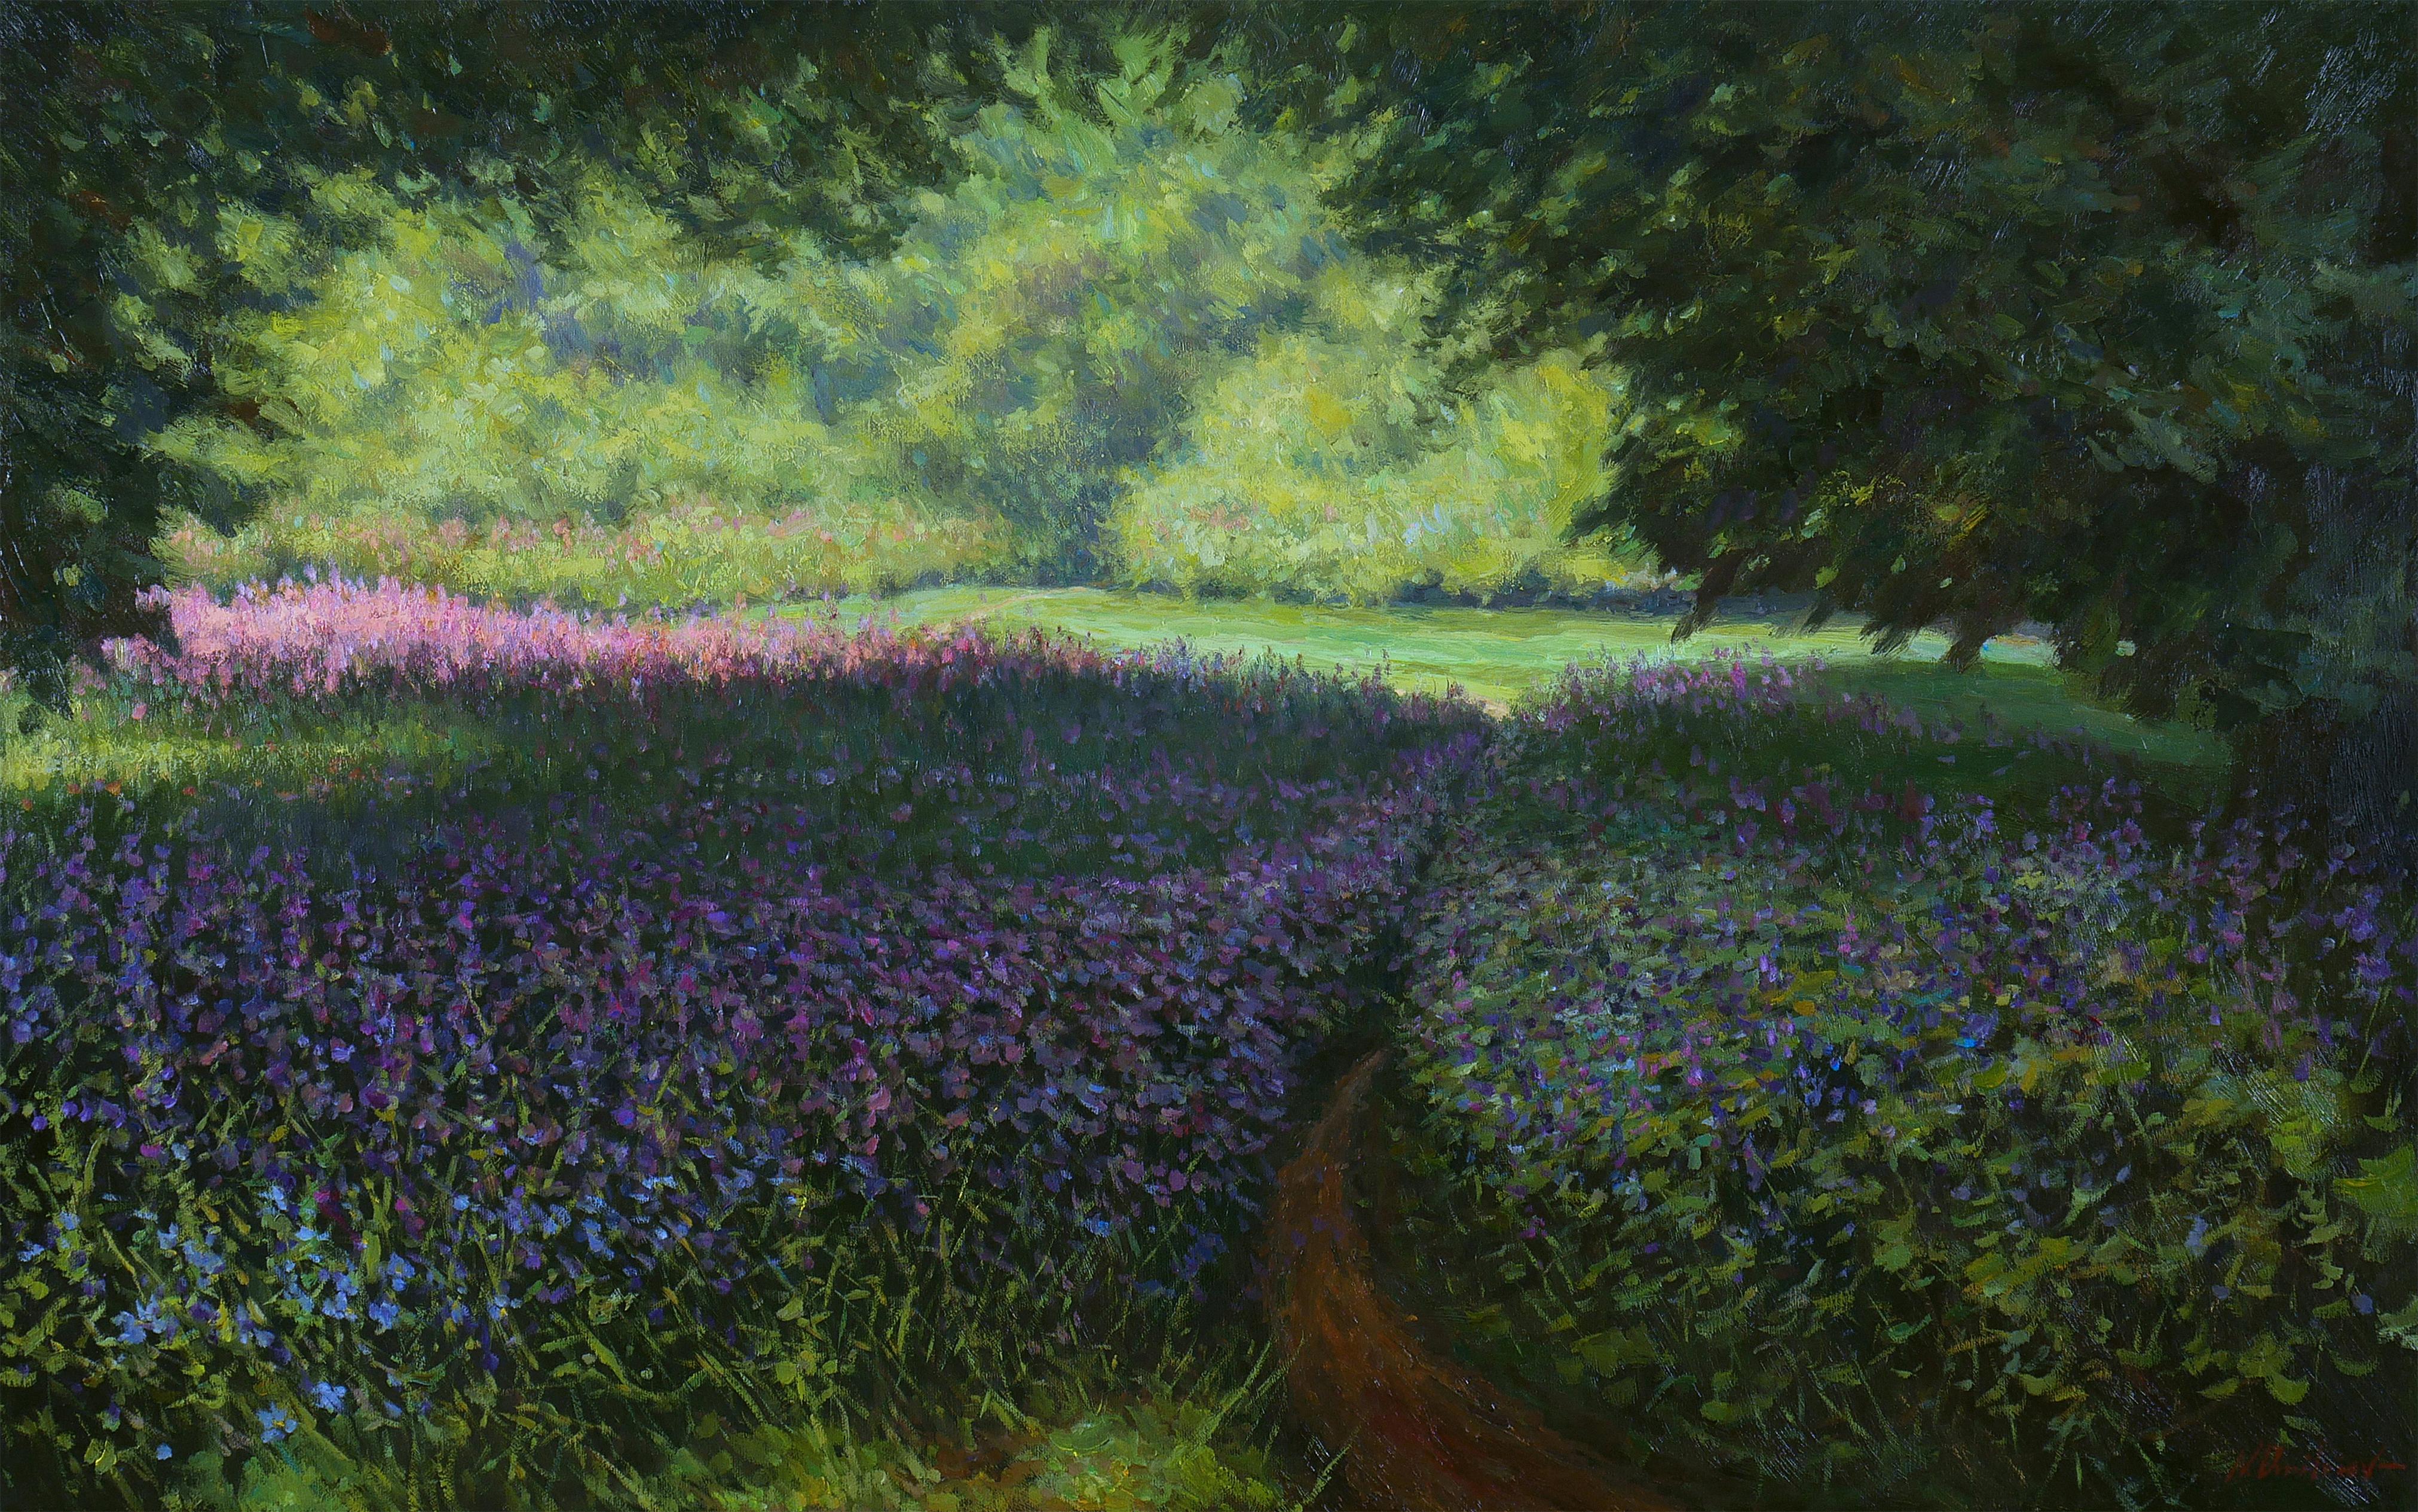 Nikolay Dmitriev Landscape Painting - The Floral Path - sunny summer landscape painting